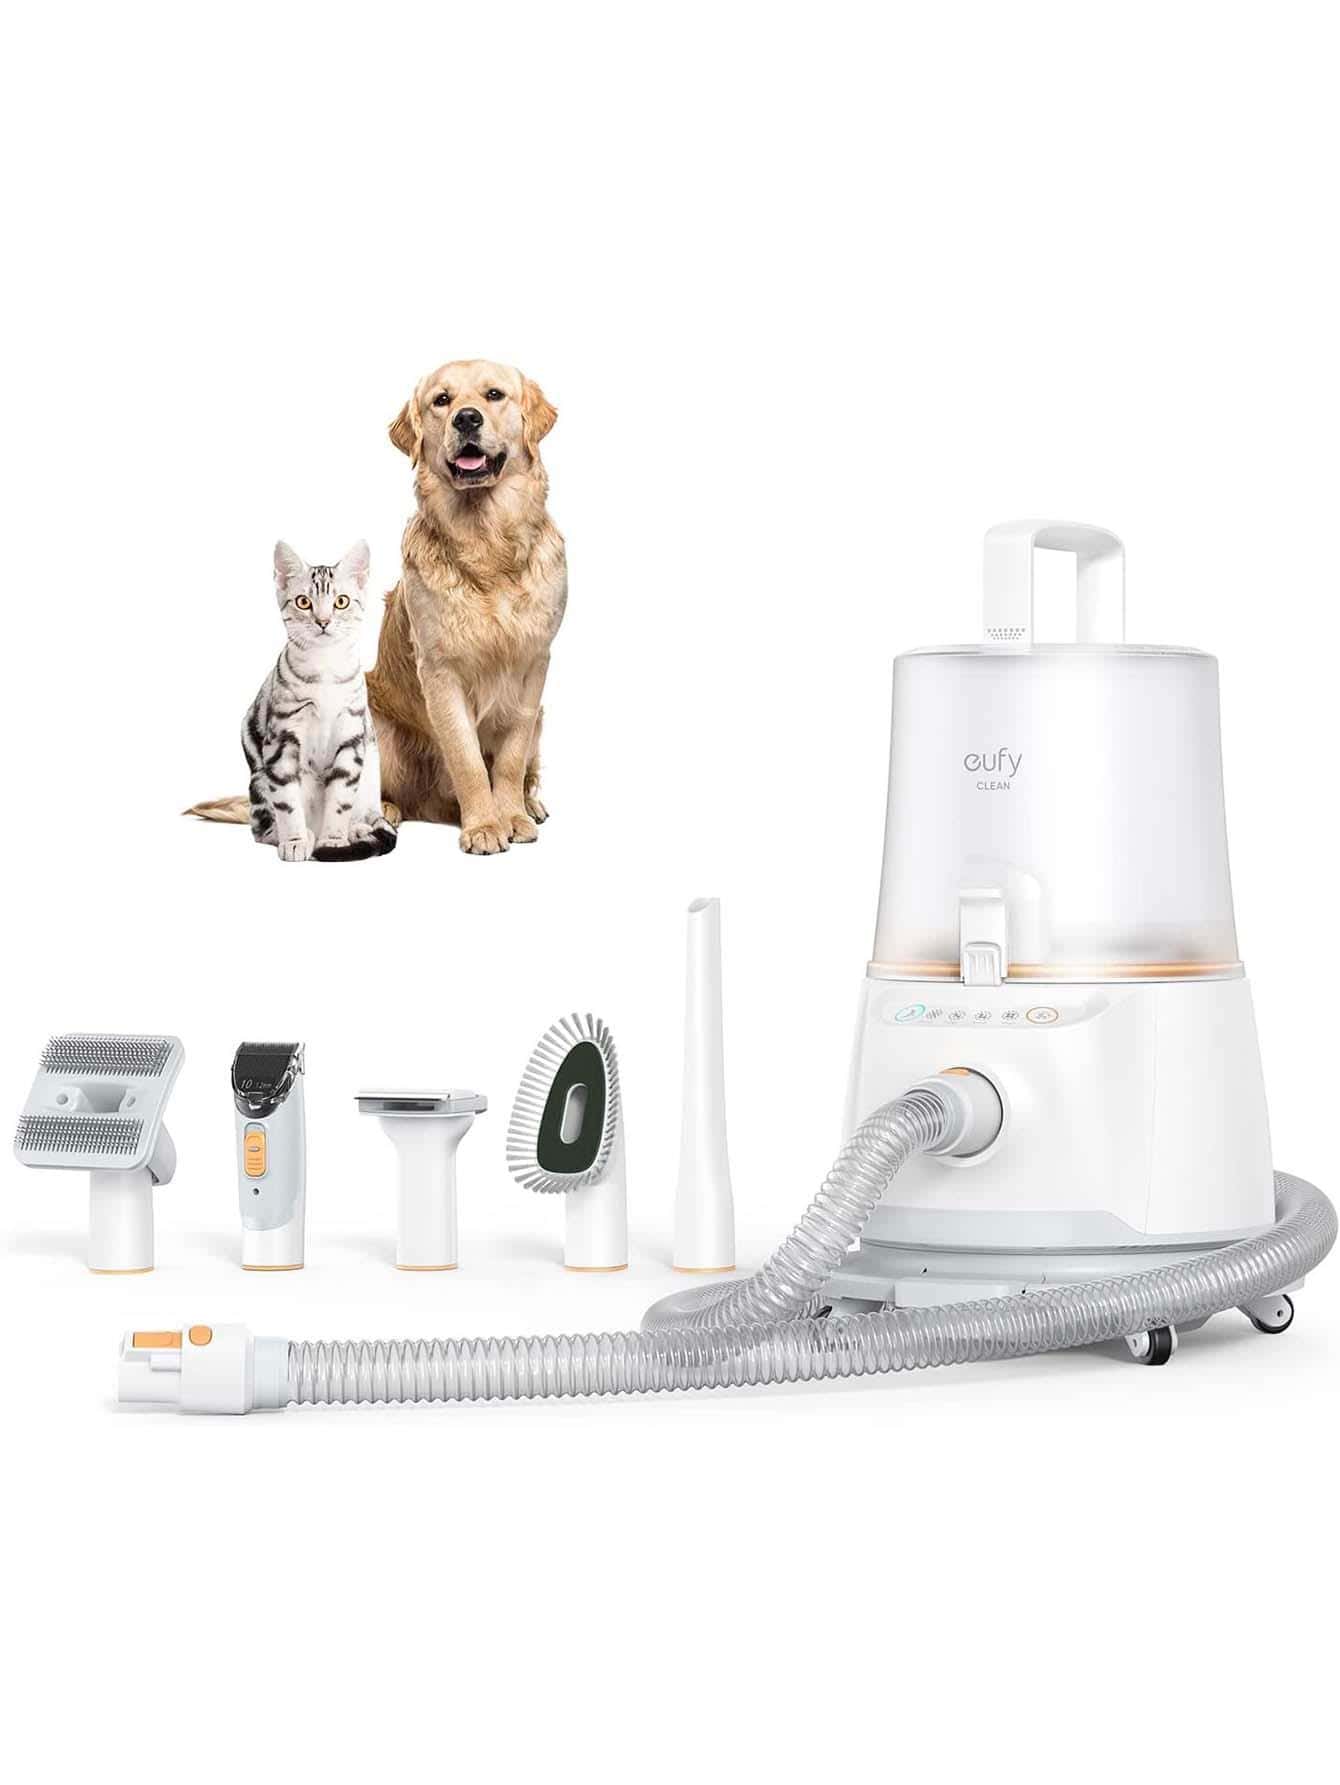 eufy Clean by Anker N930 Pet GroomingKit with Vacuum, 5-in-1 GroomingKit, Strong Suction, 4.5L Large Capacity Dust Box, Low Noise, Deshedding, Trimmers, Nozzle, Cleaning Brush for Dogs